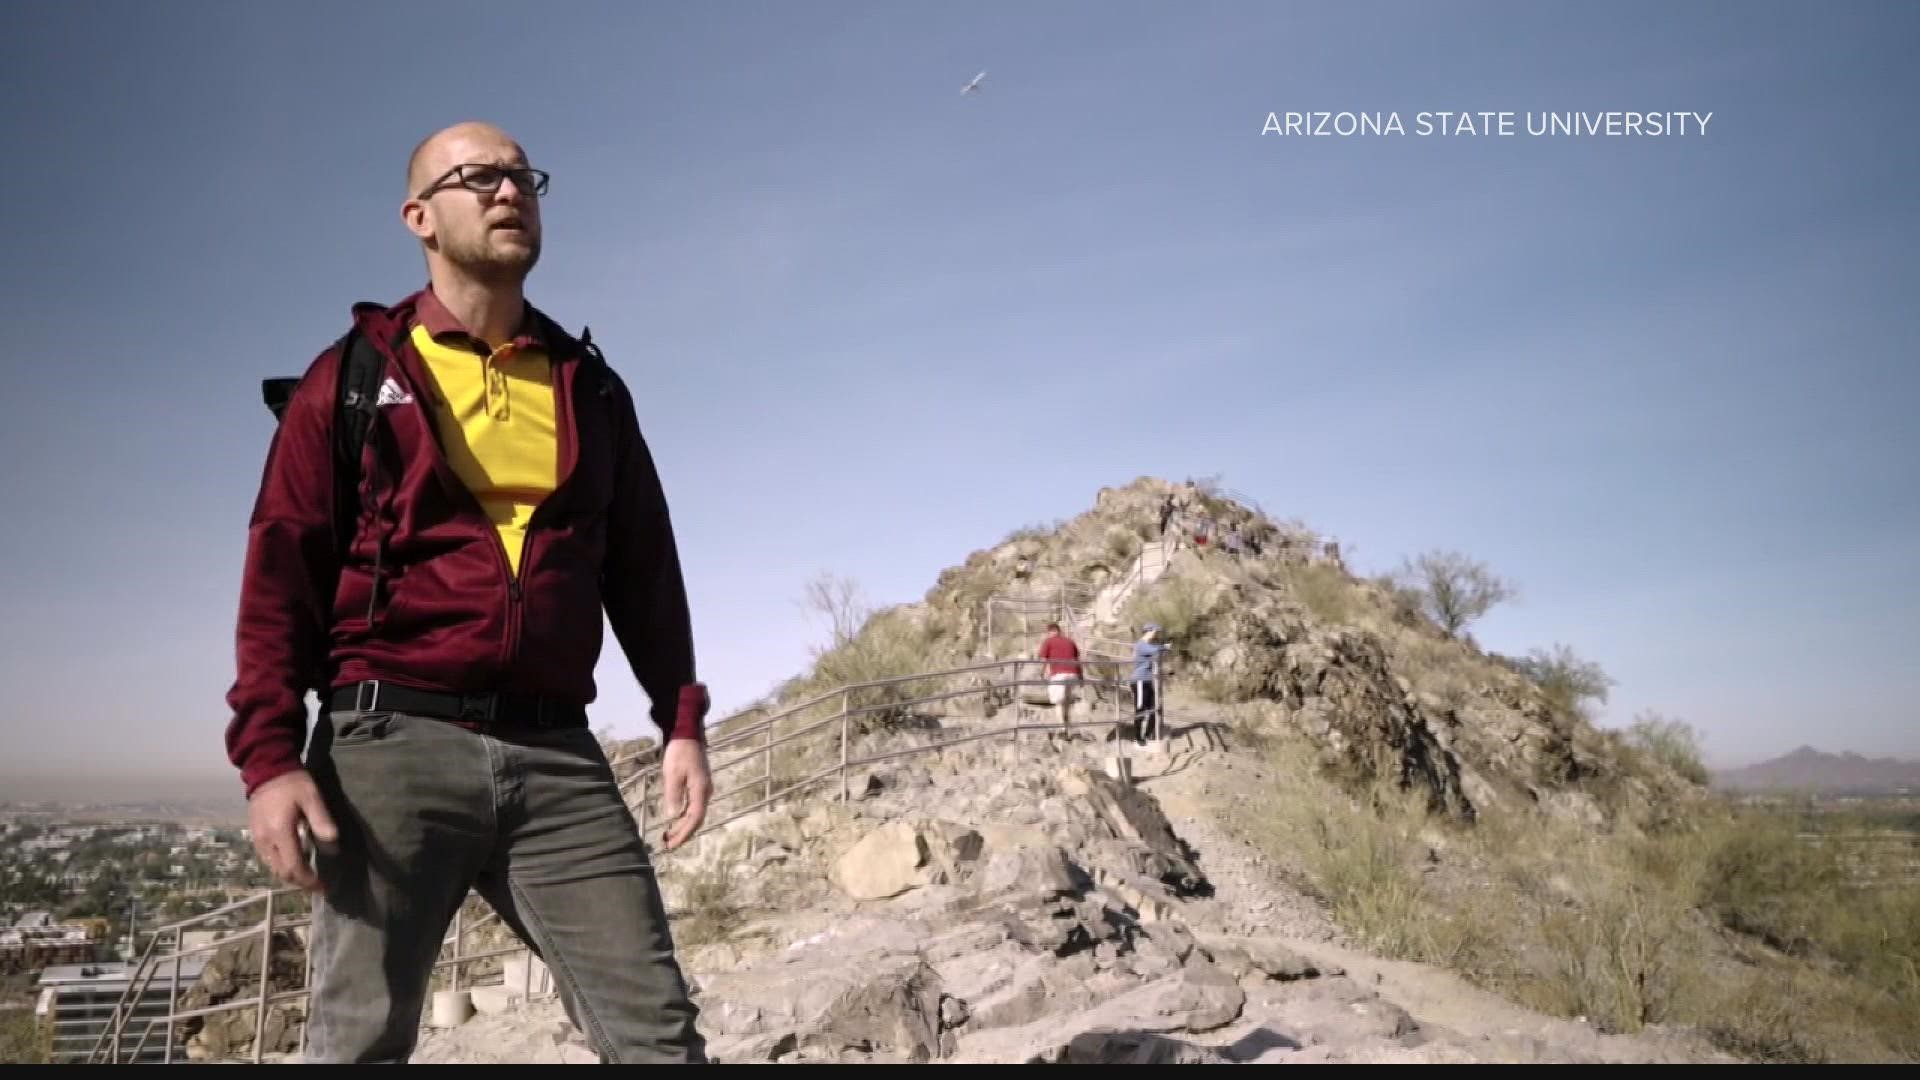 ASU researchers are looking to better understand the importance of hydration when exploring outdoors in the hot, summer temperatures. Jen Wahl has the story.